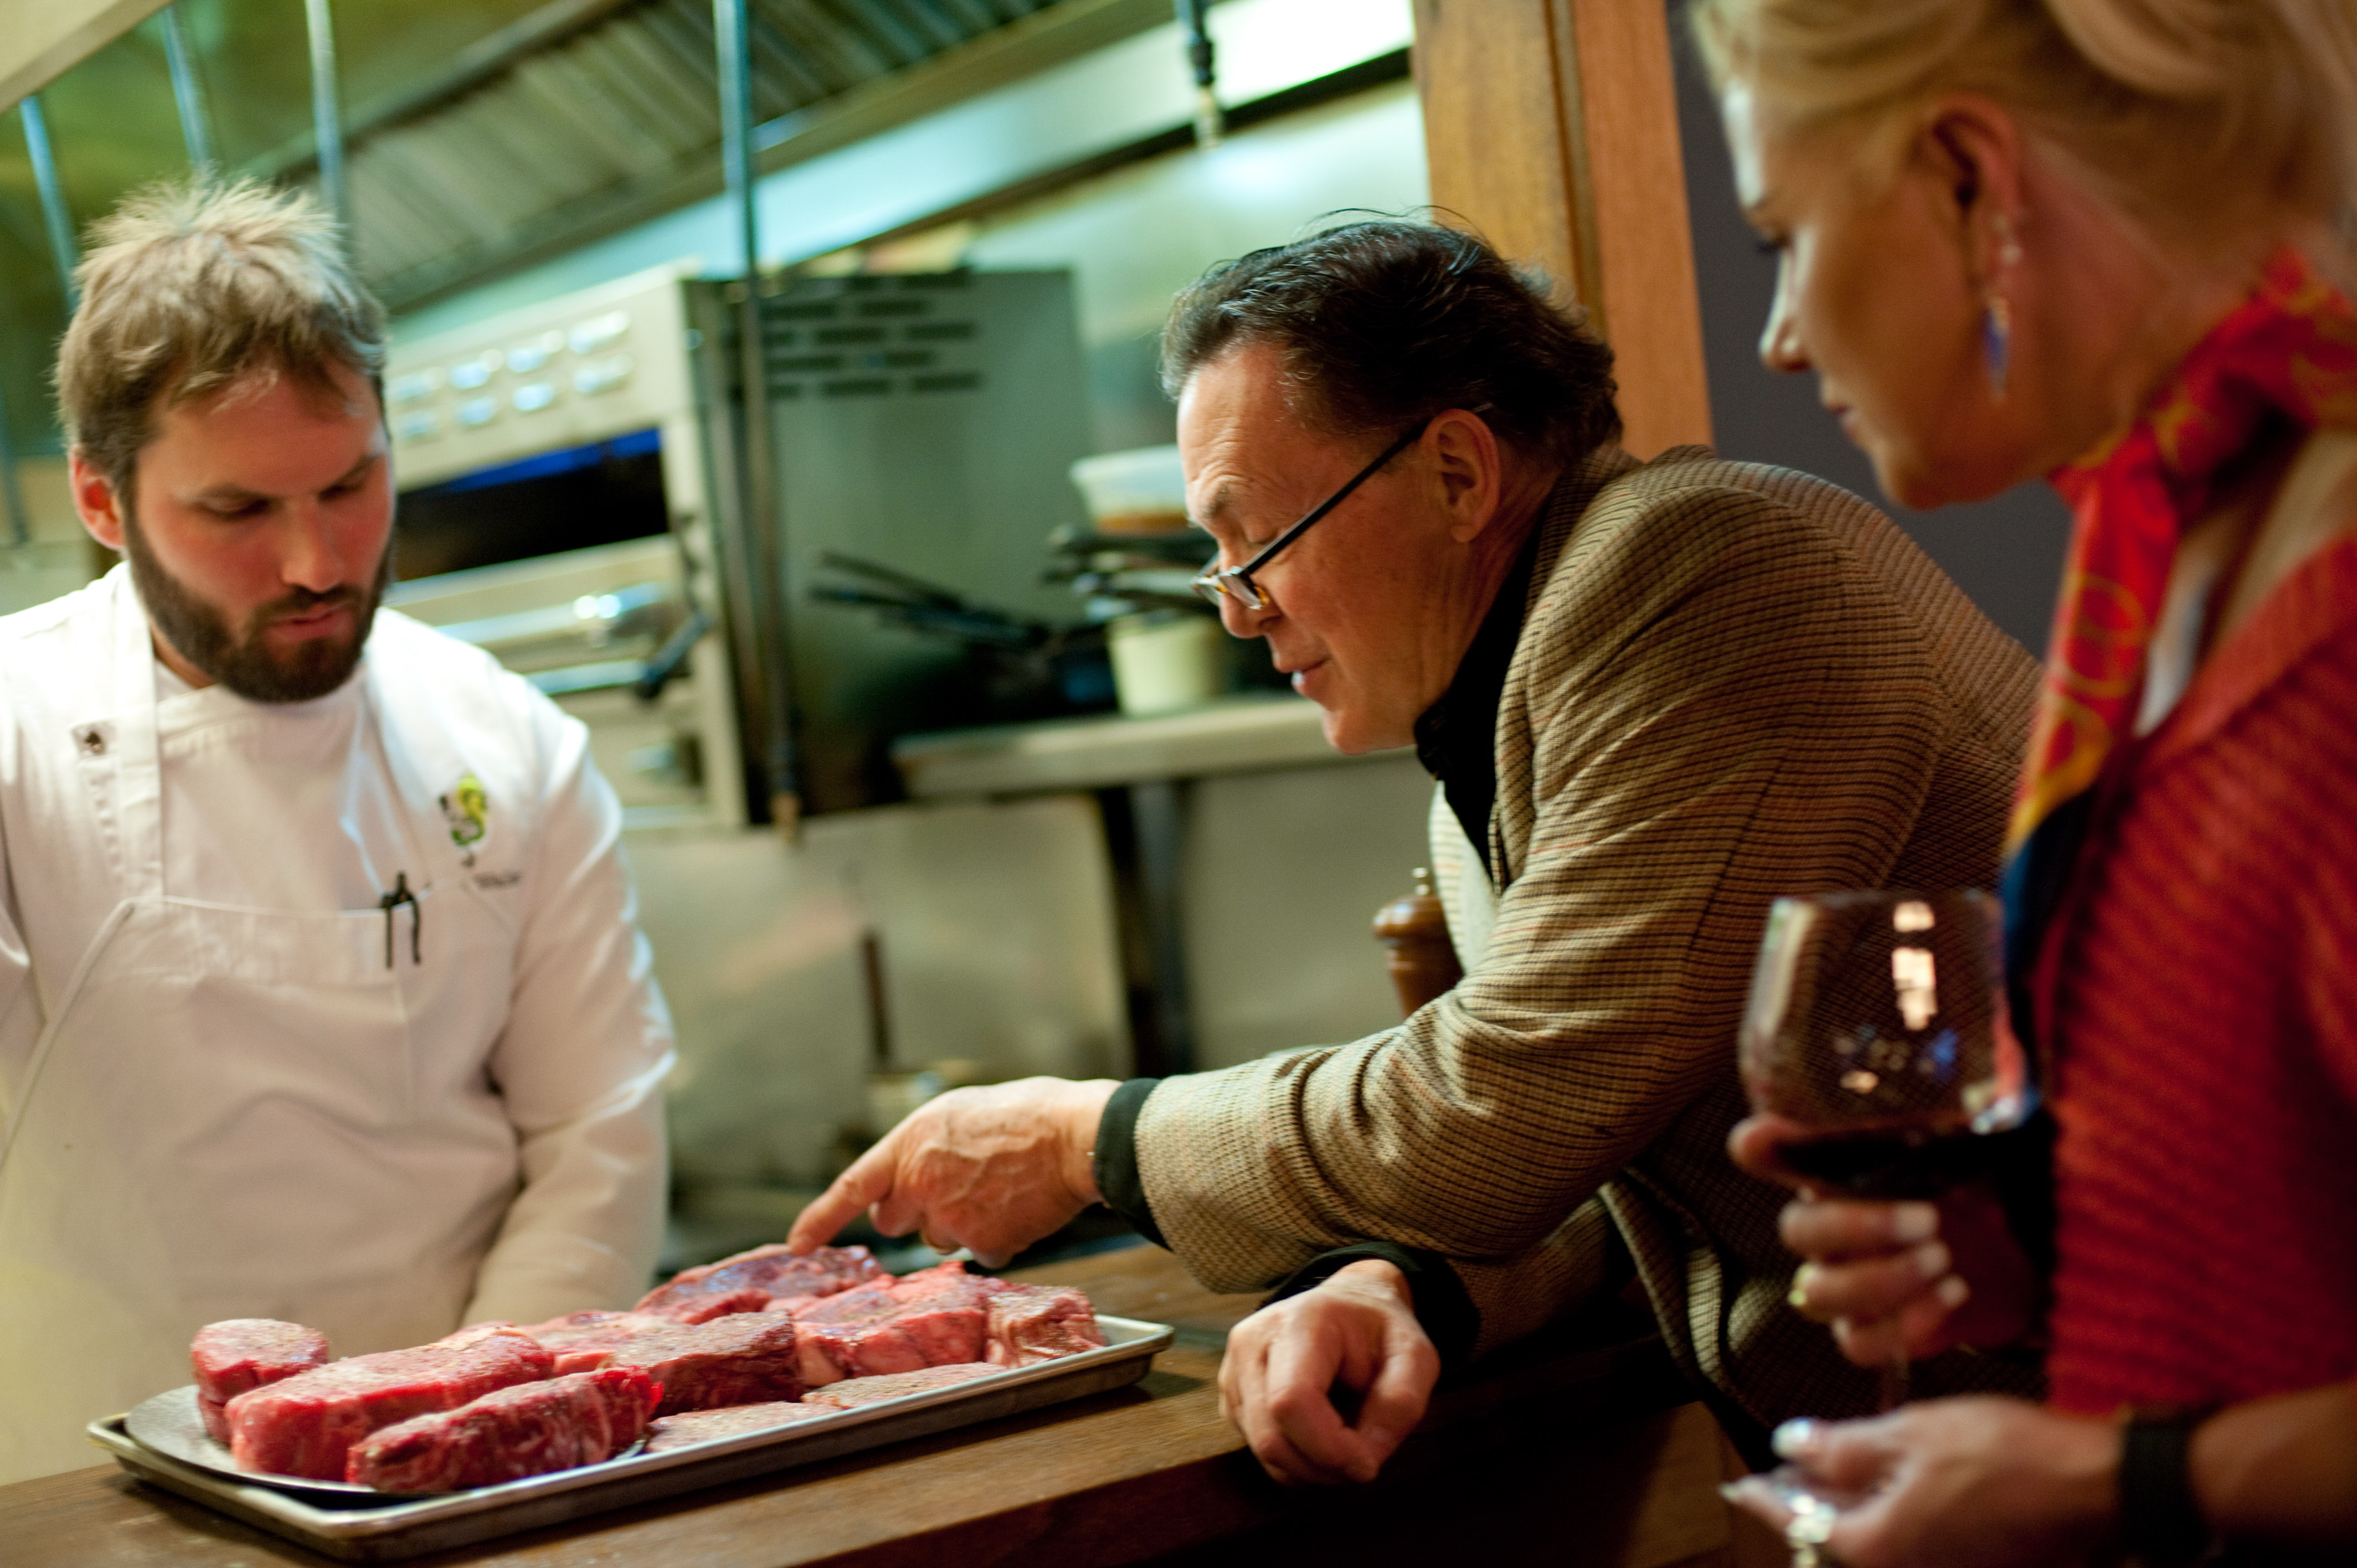 Don Smith, founder of Omega3Beef and Chef Brad Walker of Boundary Road discussing quality cuts of beef